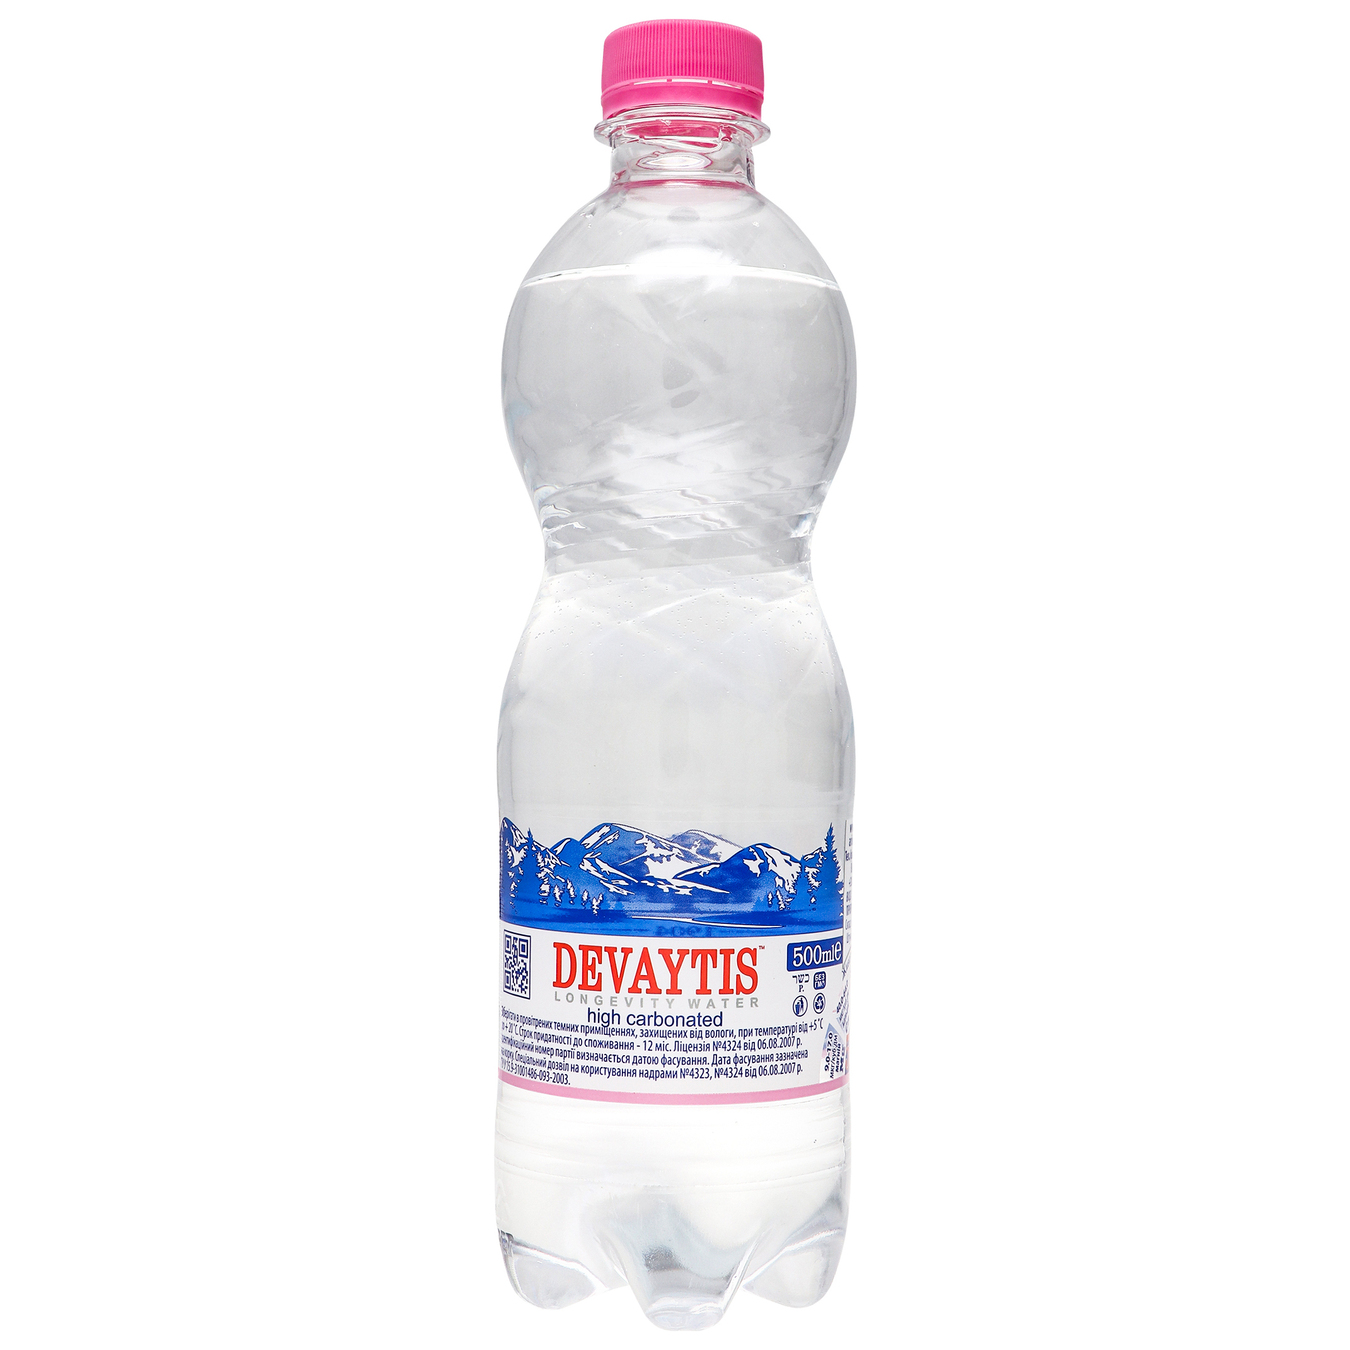 Devaitis strongly carbonated water 0.5l 4